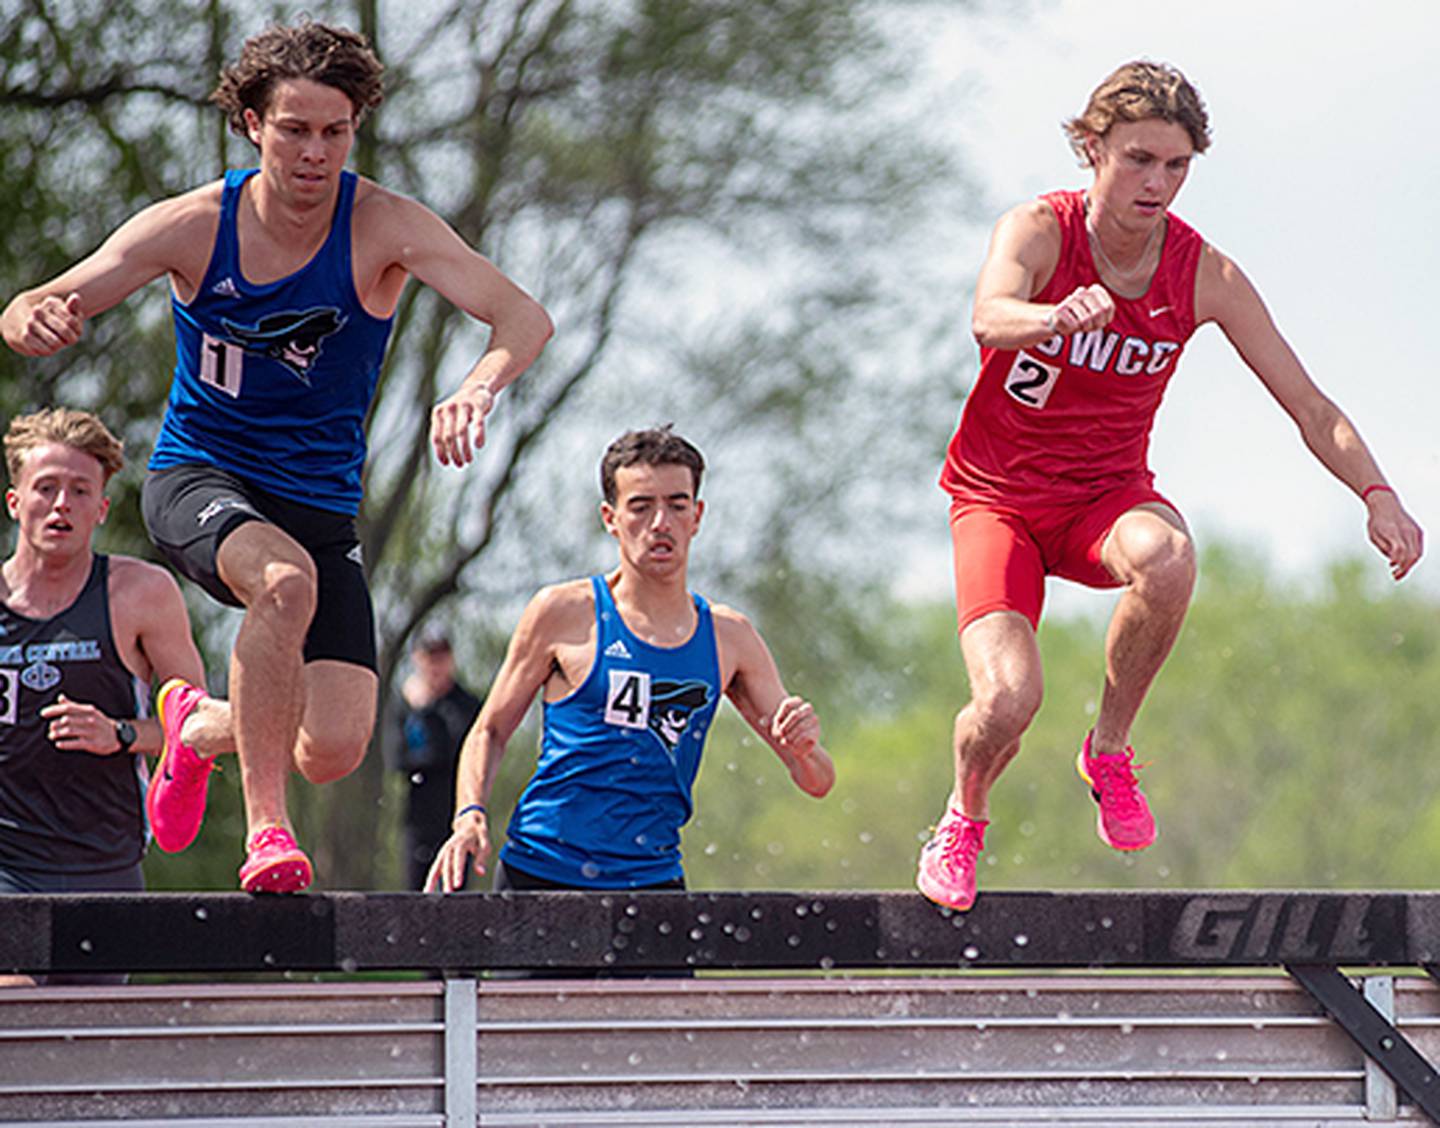 Southwestern's Chase Oates (right) clears a hurdle during the 3,000-meter steeplechase at the regional meet in Council Bluffs. Oates won the race in 9:37.59.